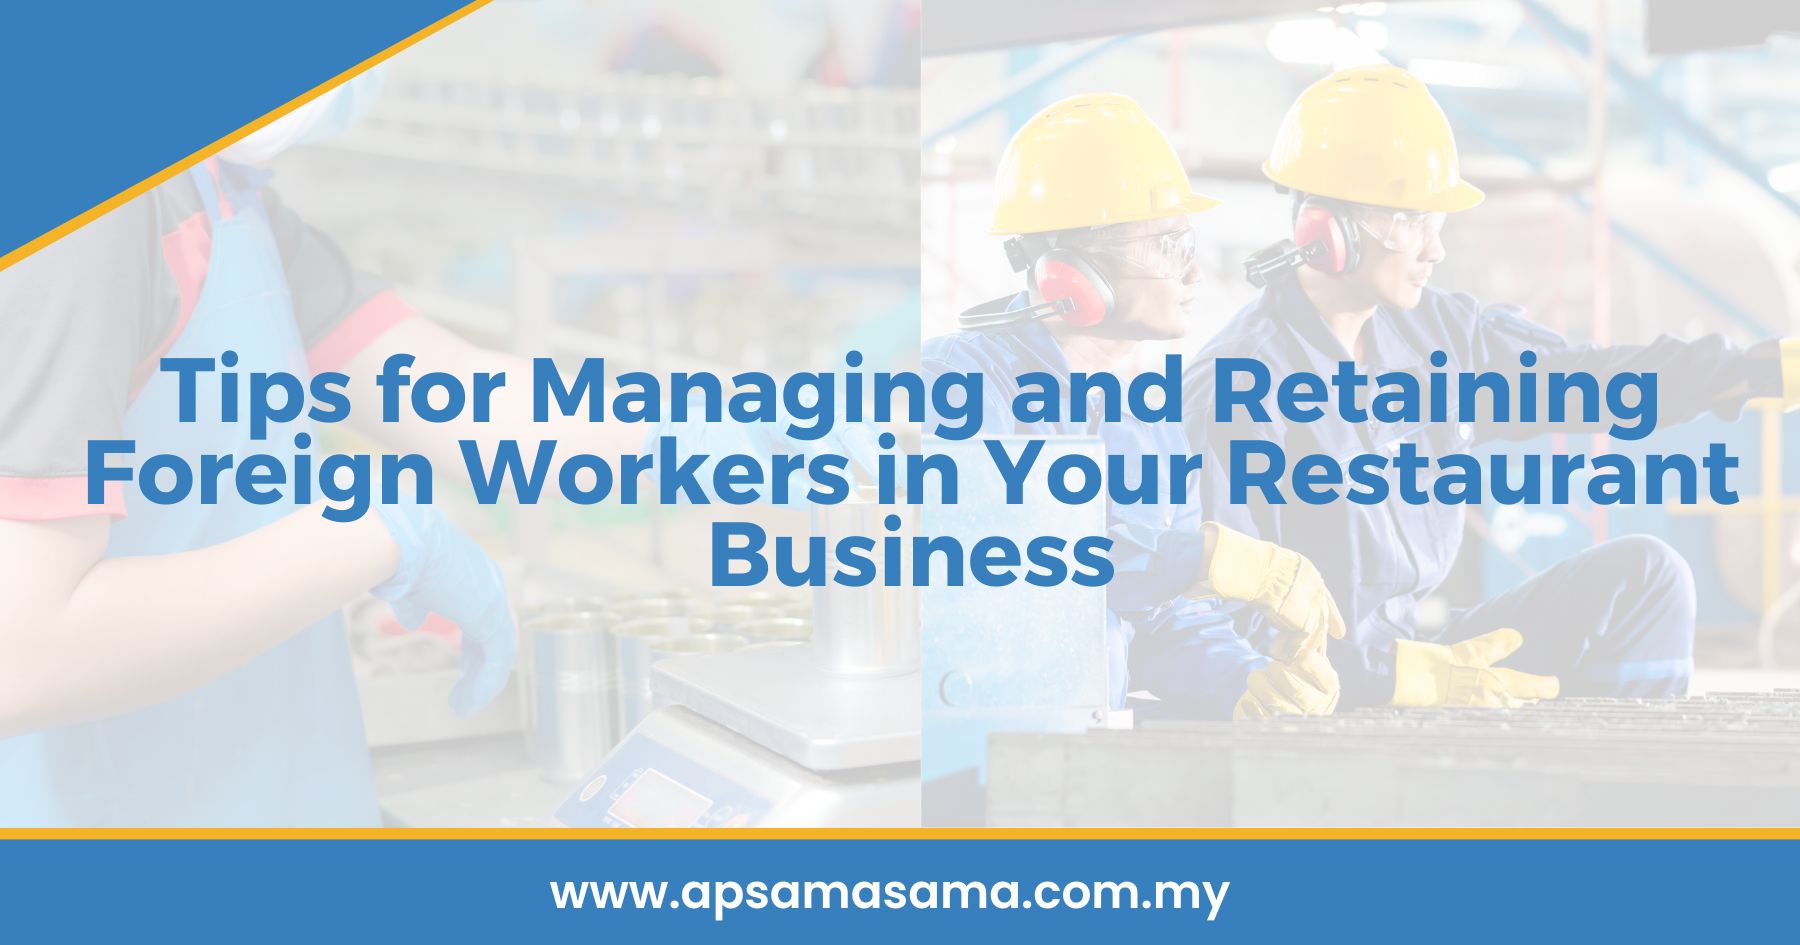 Tips for Managing and Retaining Foreign Workers in Your Restaurant Business